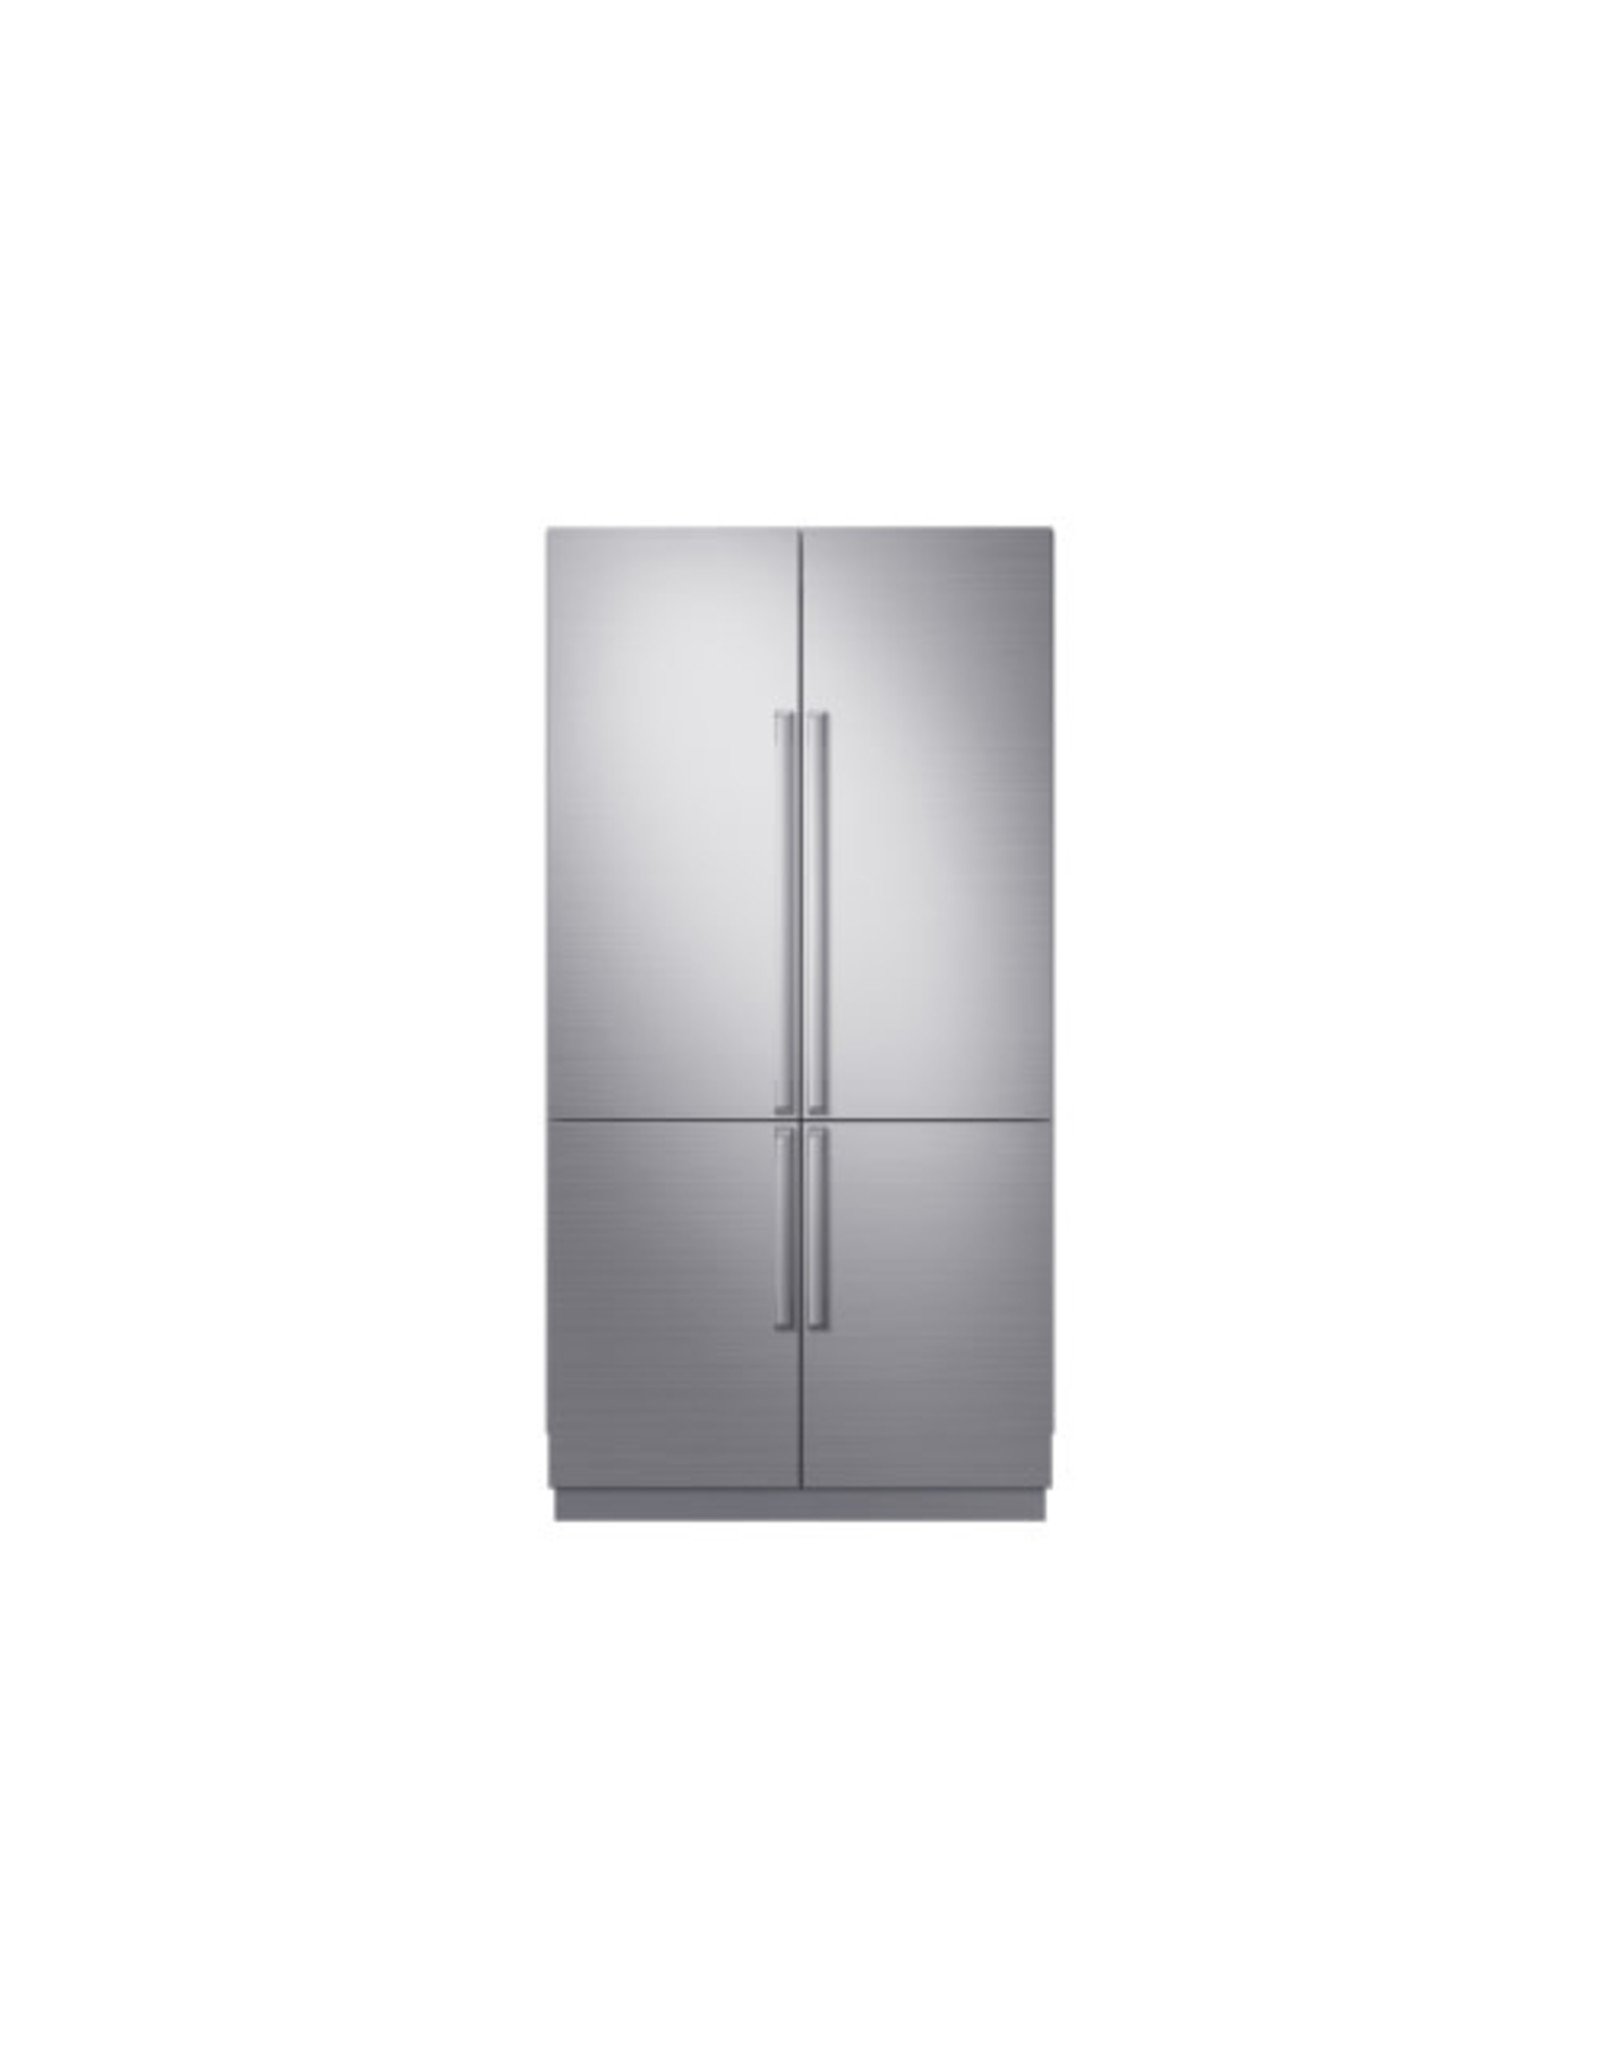 SAMSUNG BRF425200AP 42" Built-in Chef Collection RefrigeratorBRF425200AP 42" Built-in Chef Collection Refrigerator